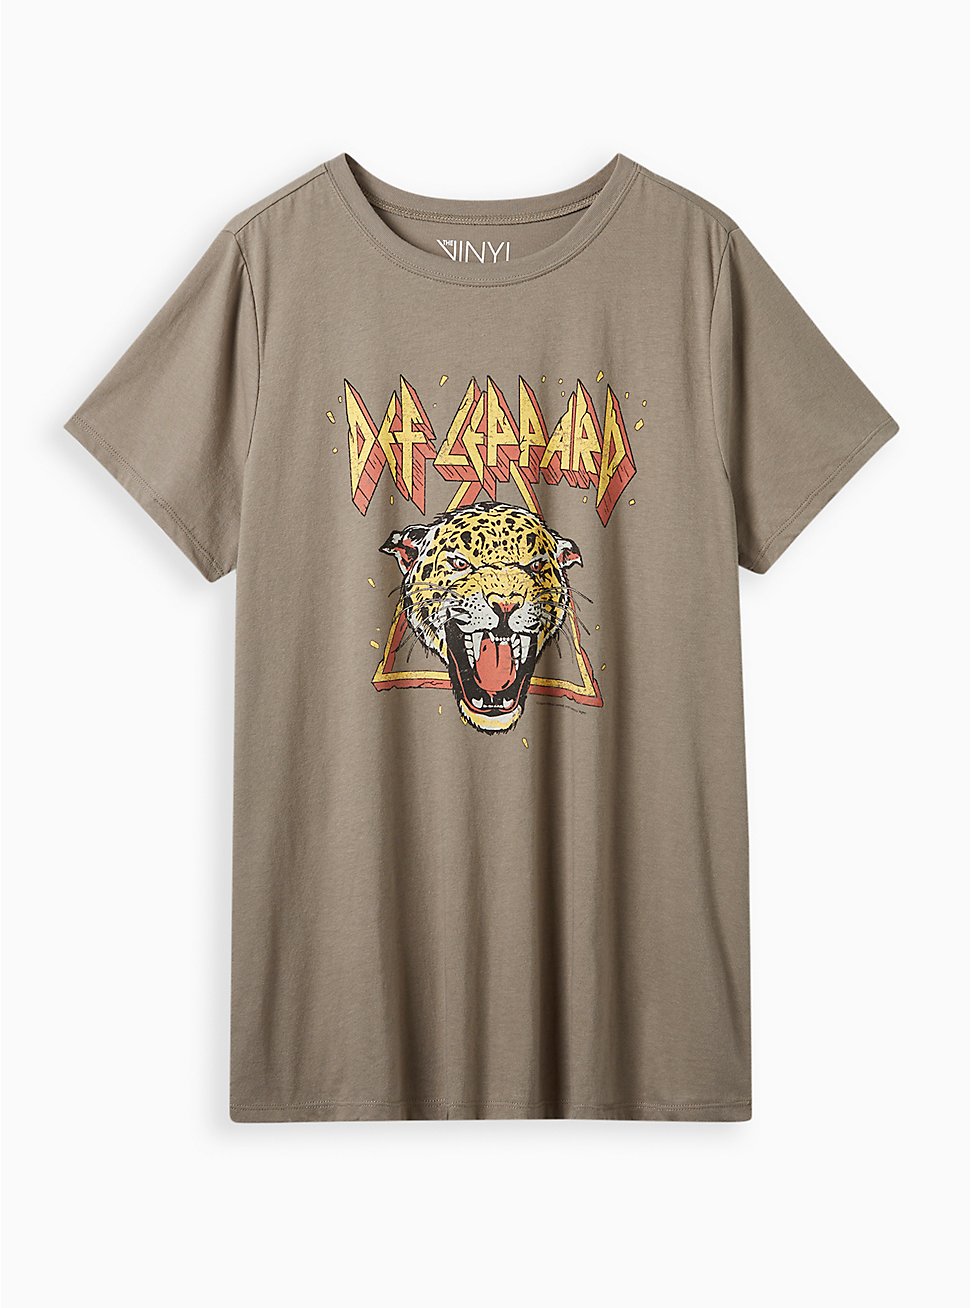 Plus Size Classic Fit Tee - Cotton Def Leppard Dusty Olive, DUSTY OLIVE, hi-res